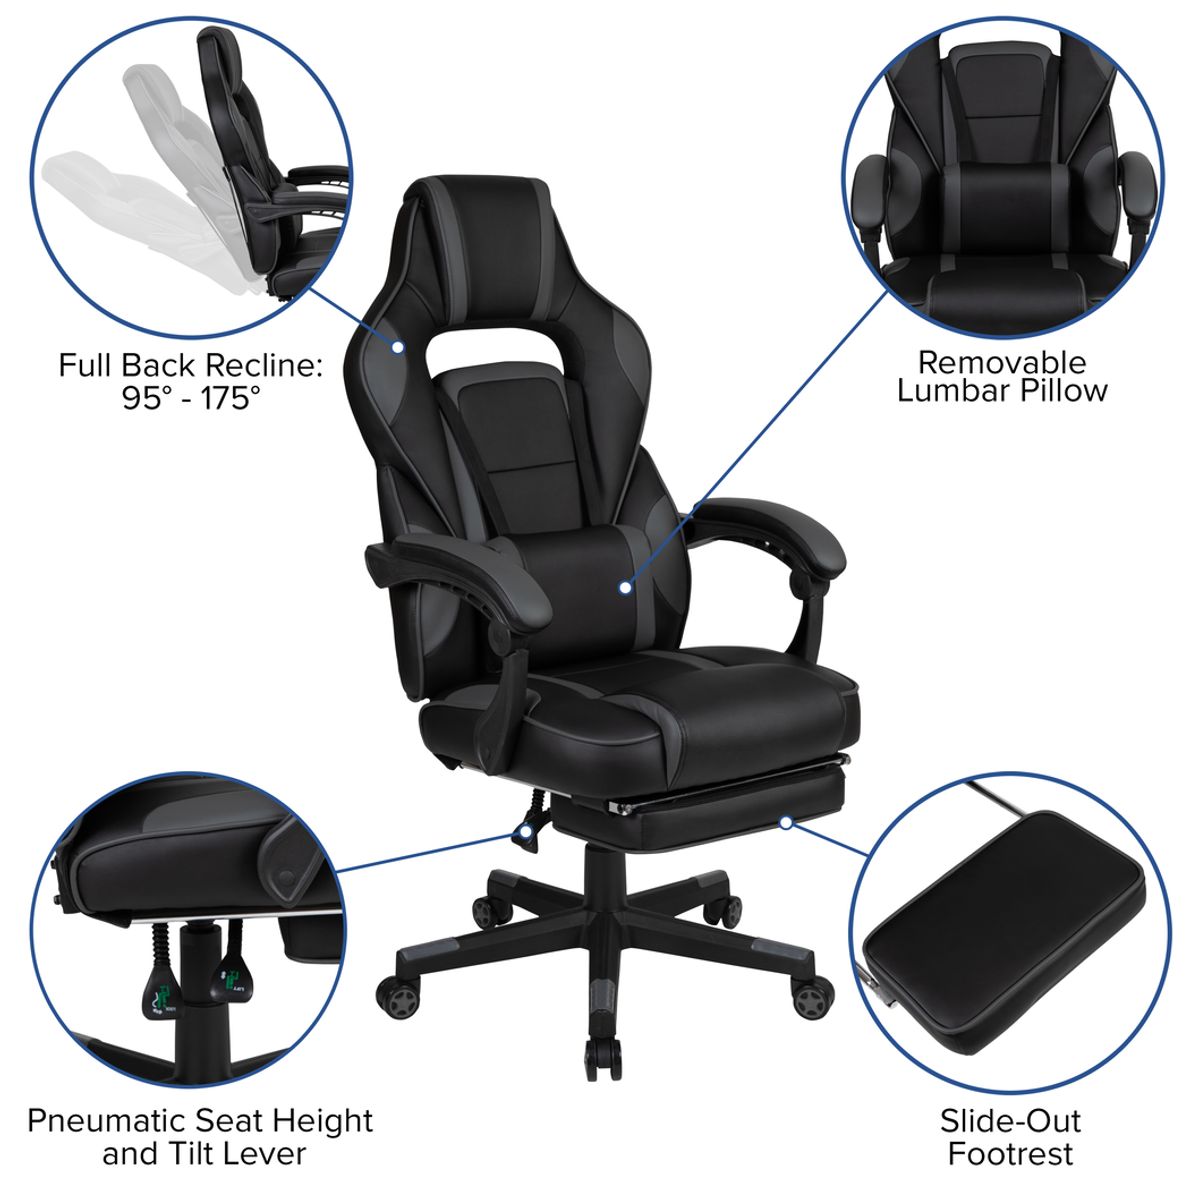 https://media.rtg-prprod.com/kids-exfor-gray-gaming-chair-with-footrest_38202886_alt-image-12?cache-id=cfb62e55ed9c476dab419e6cc3f3f59f&h=1190&w=1190